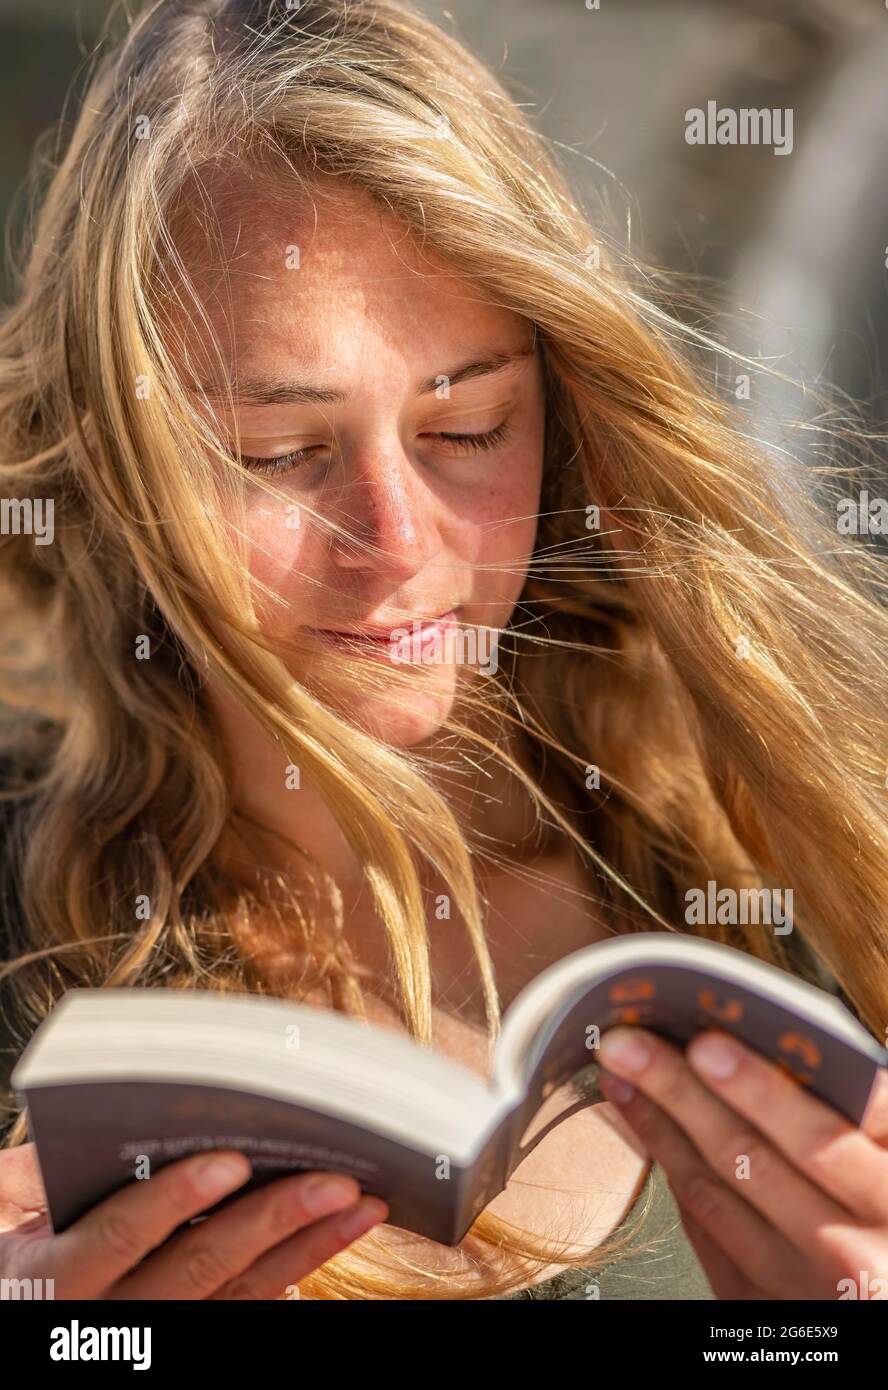 Young woman reading, Greece Stock Photo